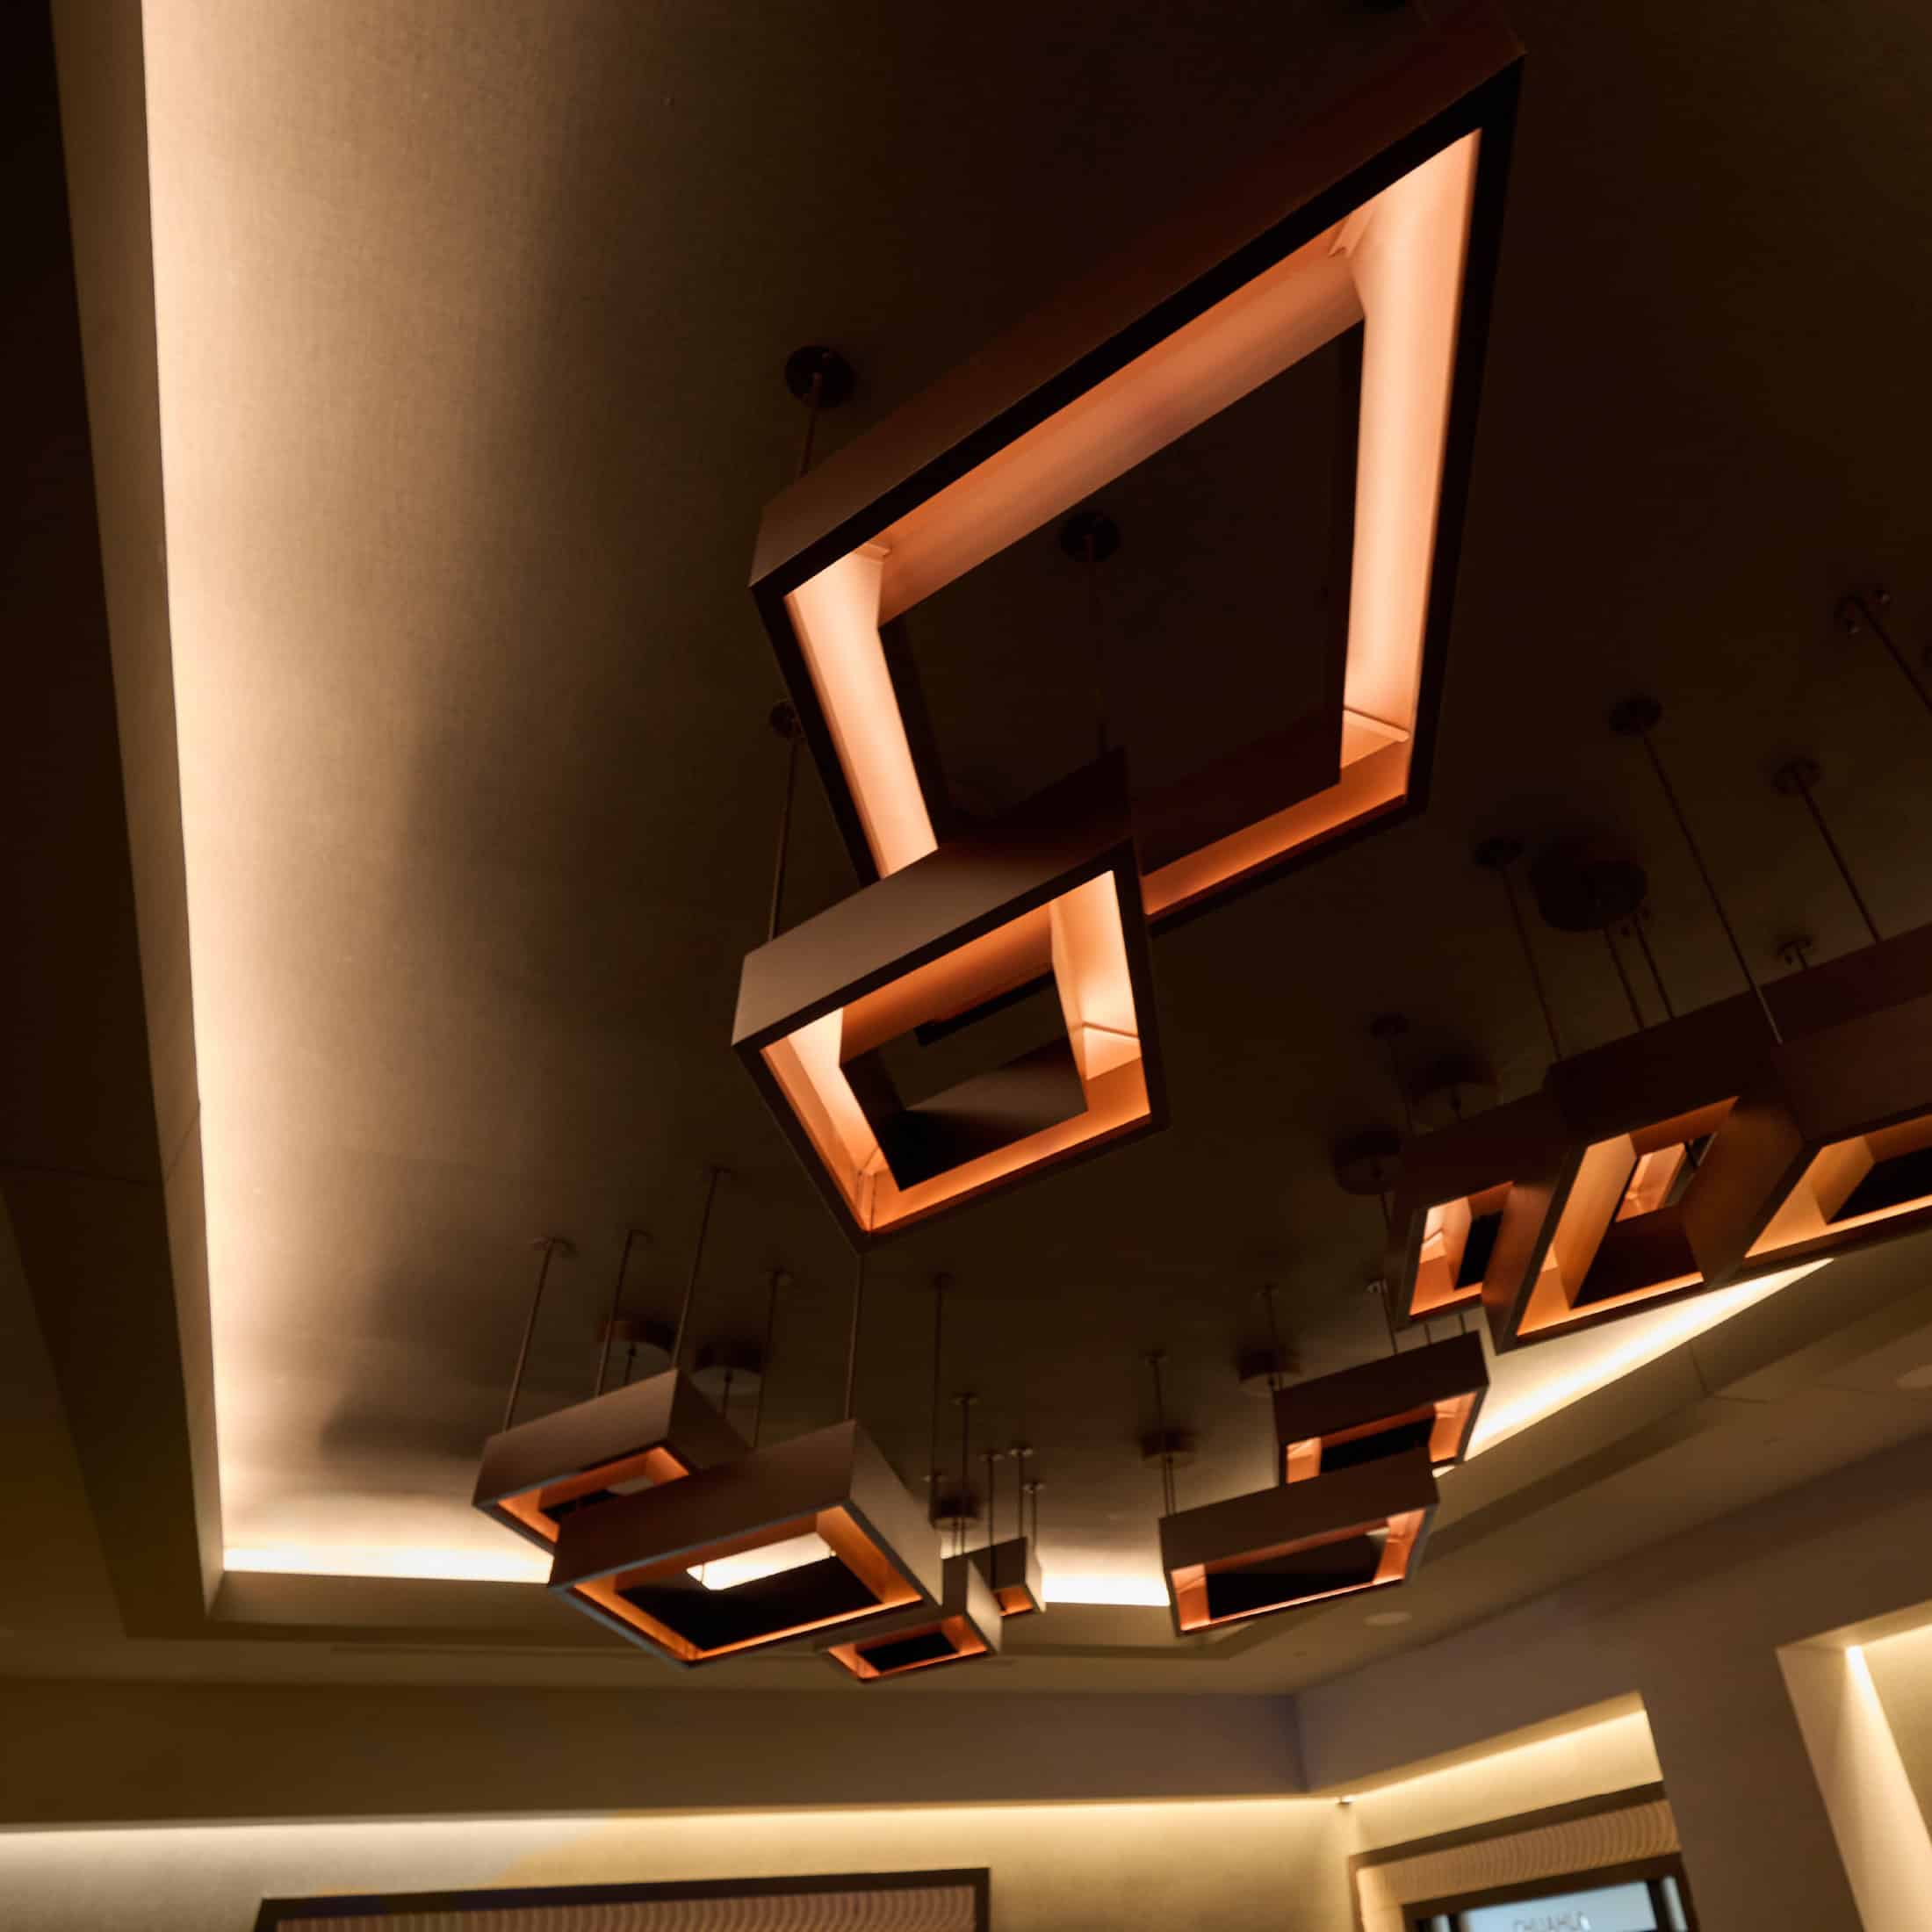 Concentric diamond light fixtures on the ceiling